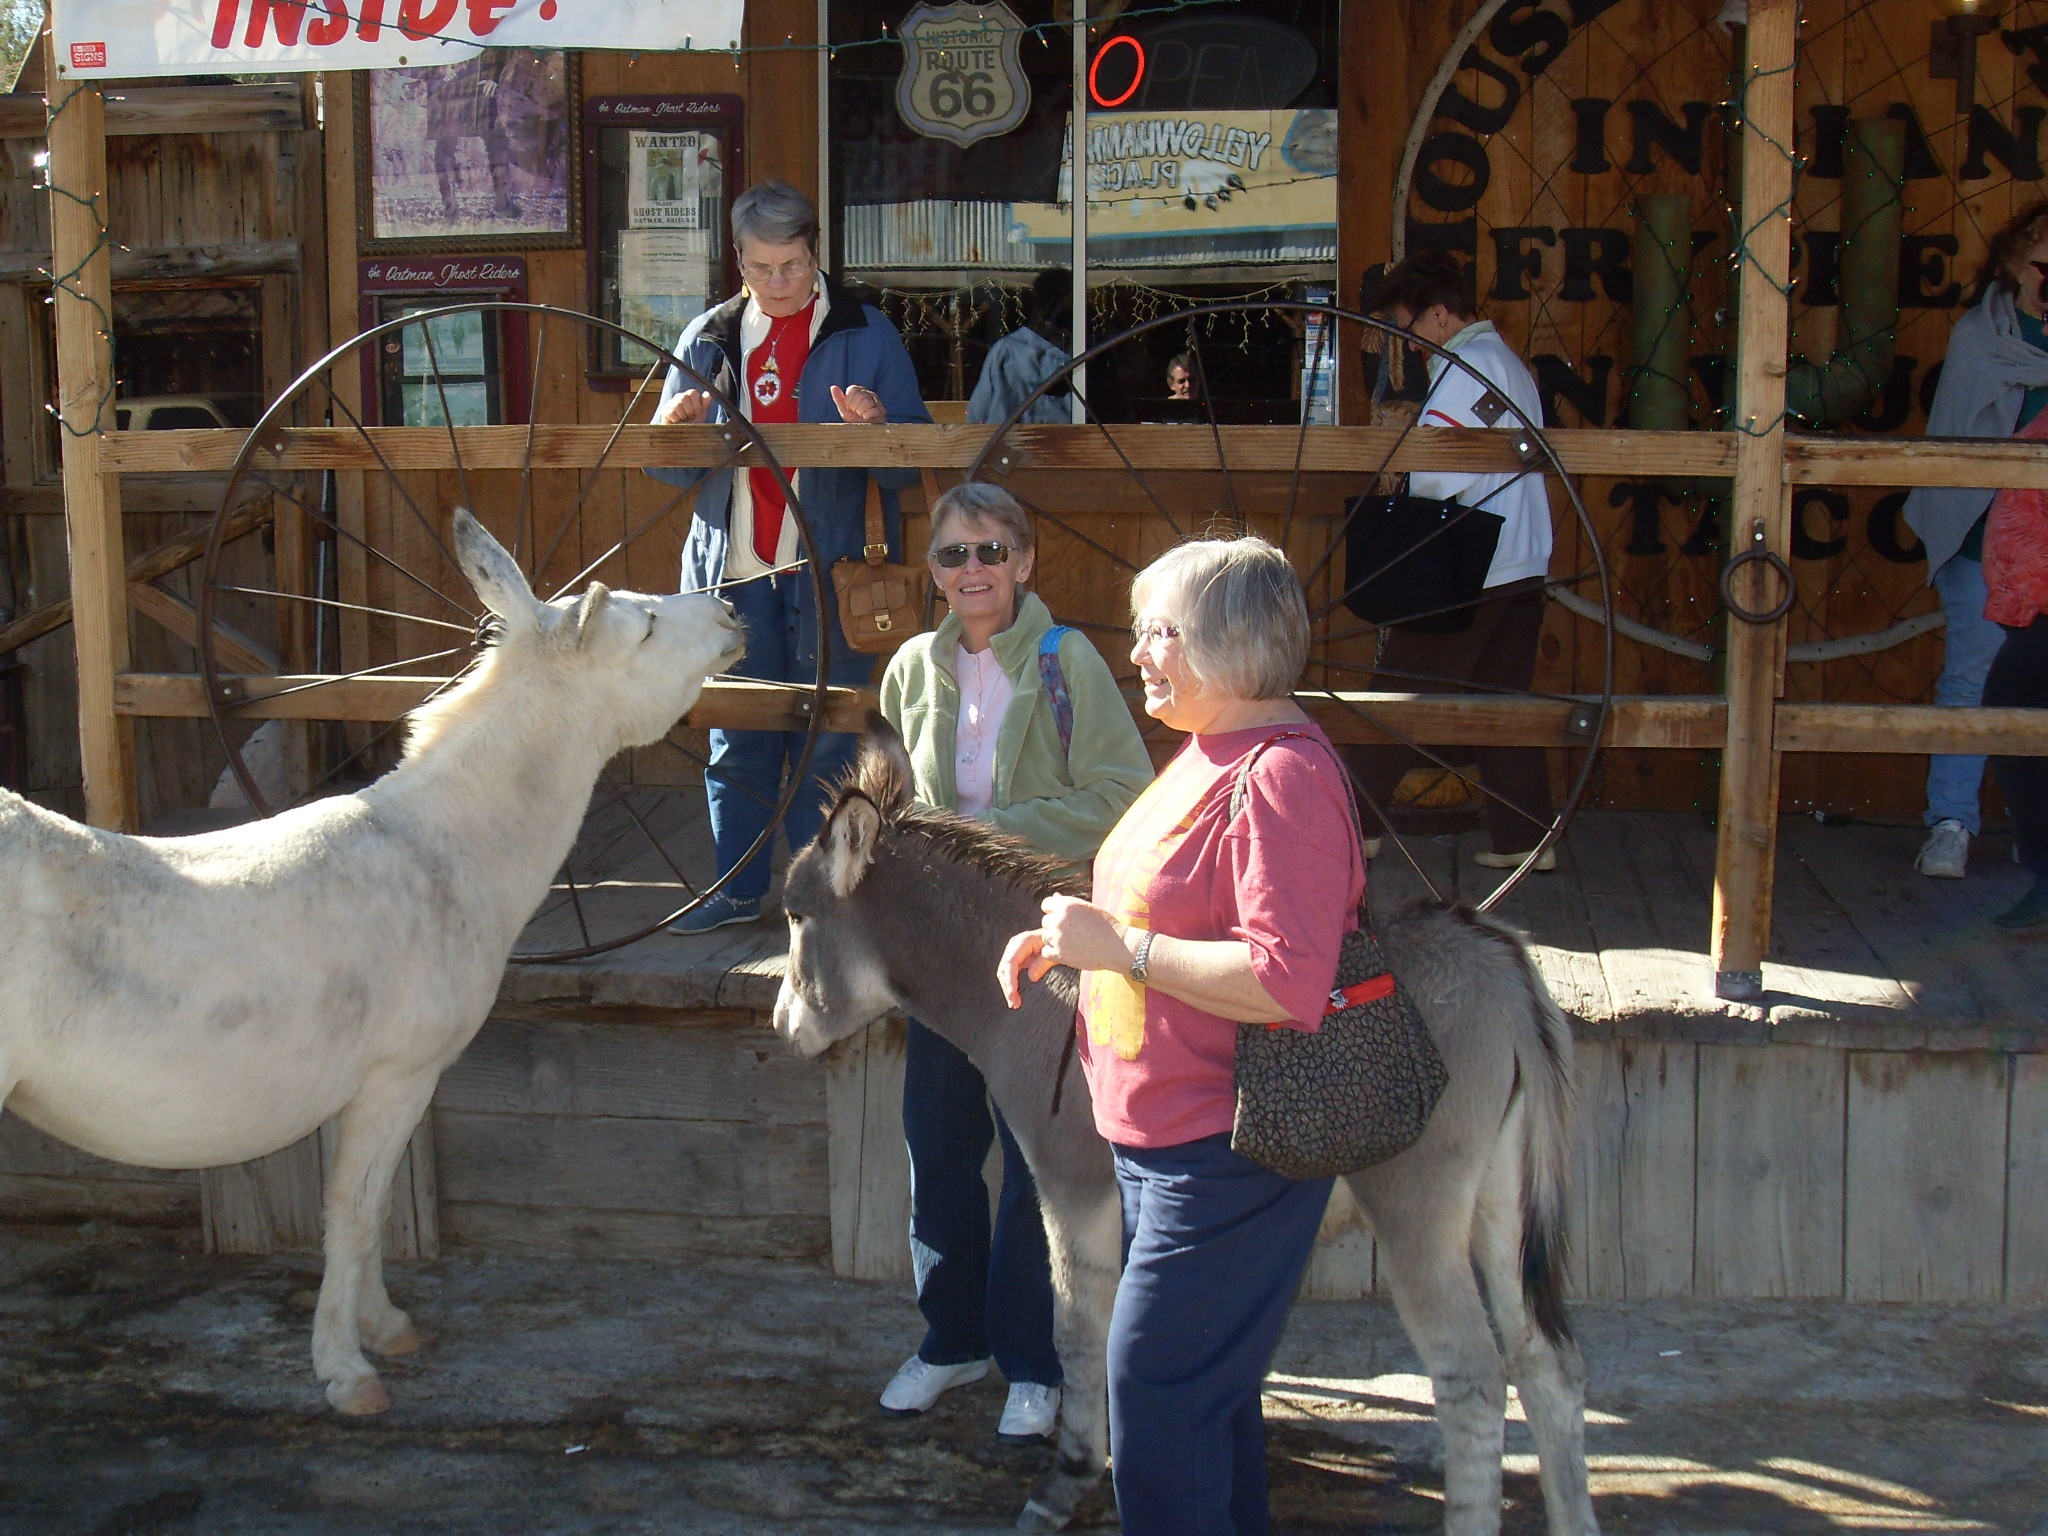 The burros attract a lot of attention in Oatman.